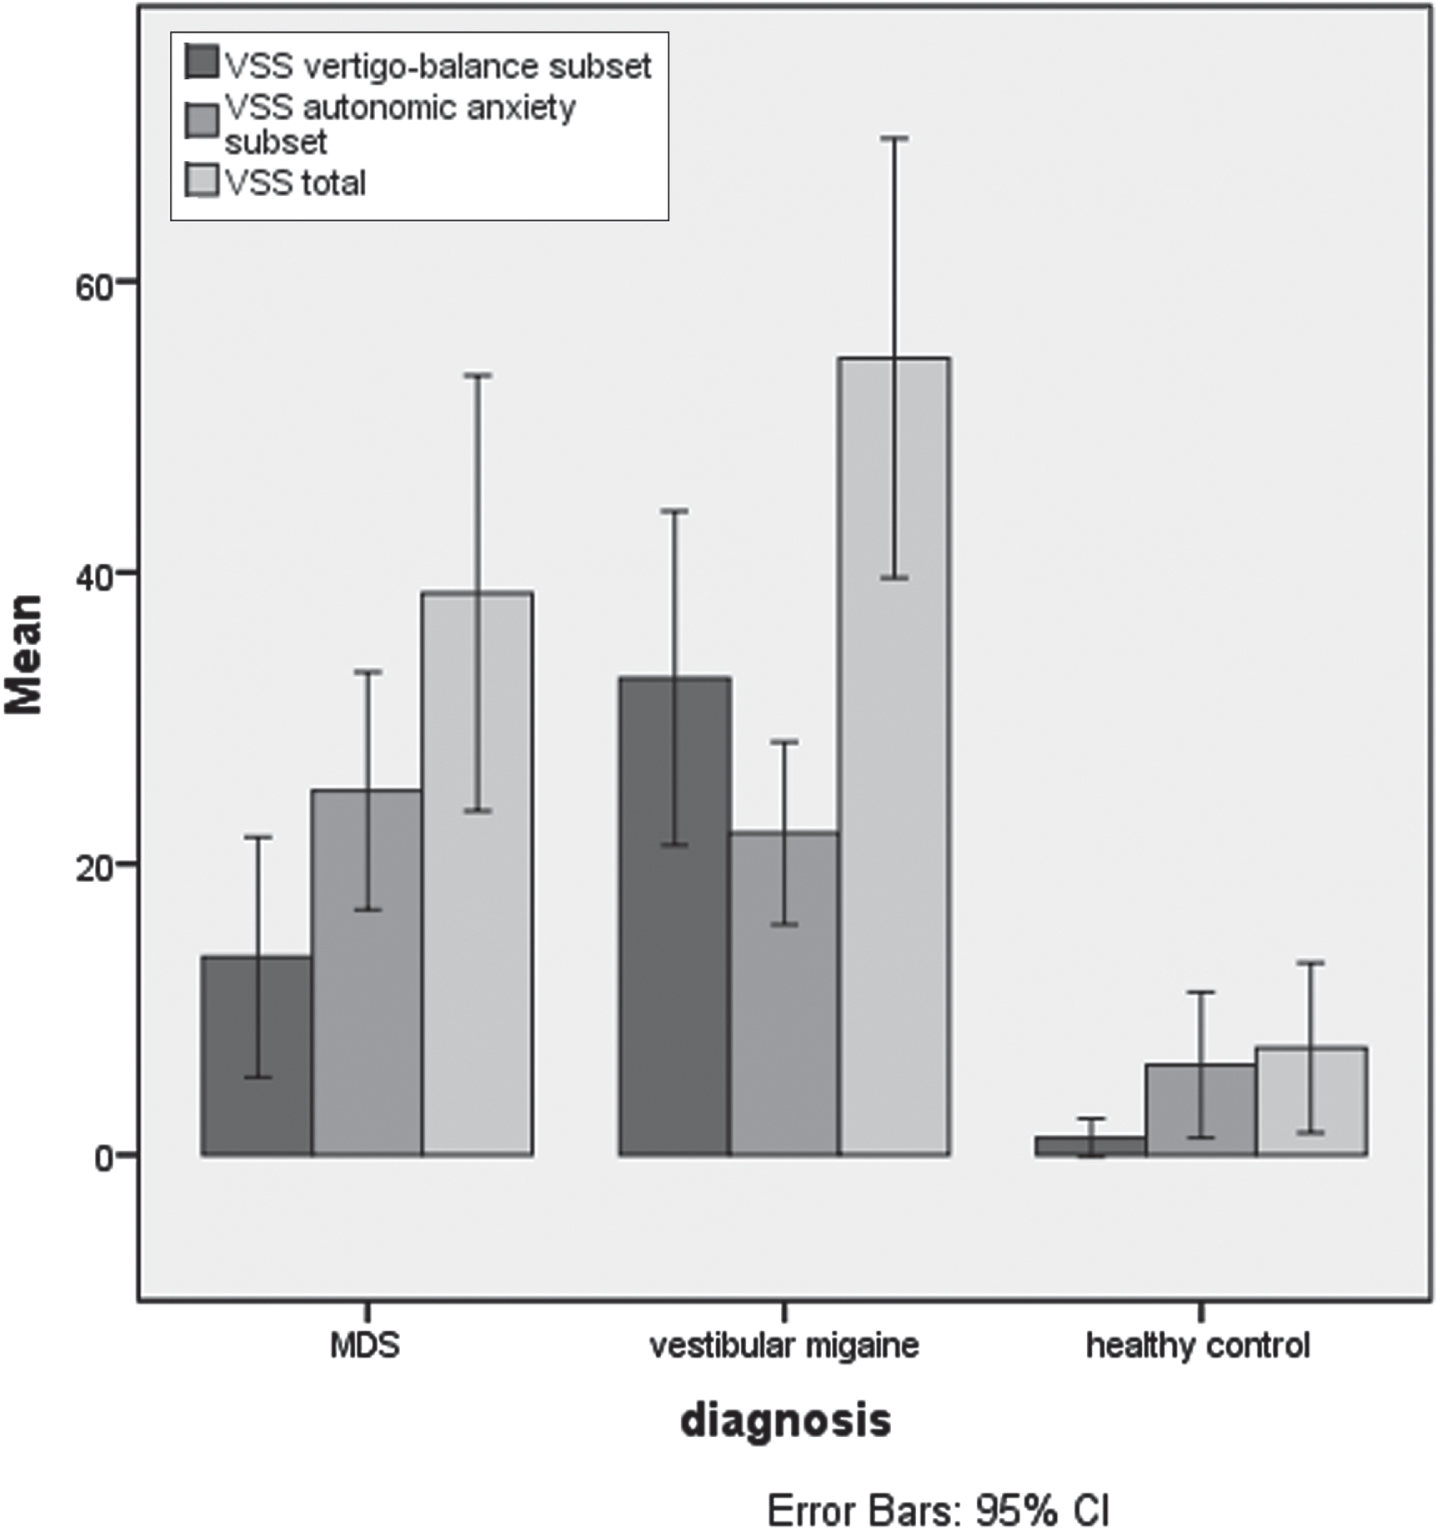 Bar chart to show the VSS scores in the MDS, vestibular migraine and healthy control groups